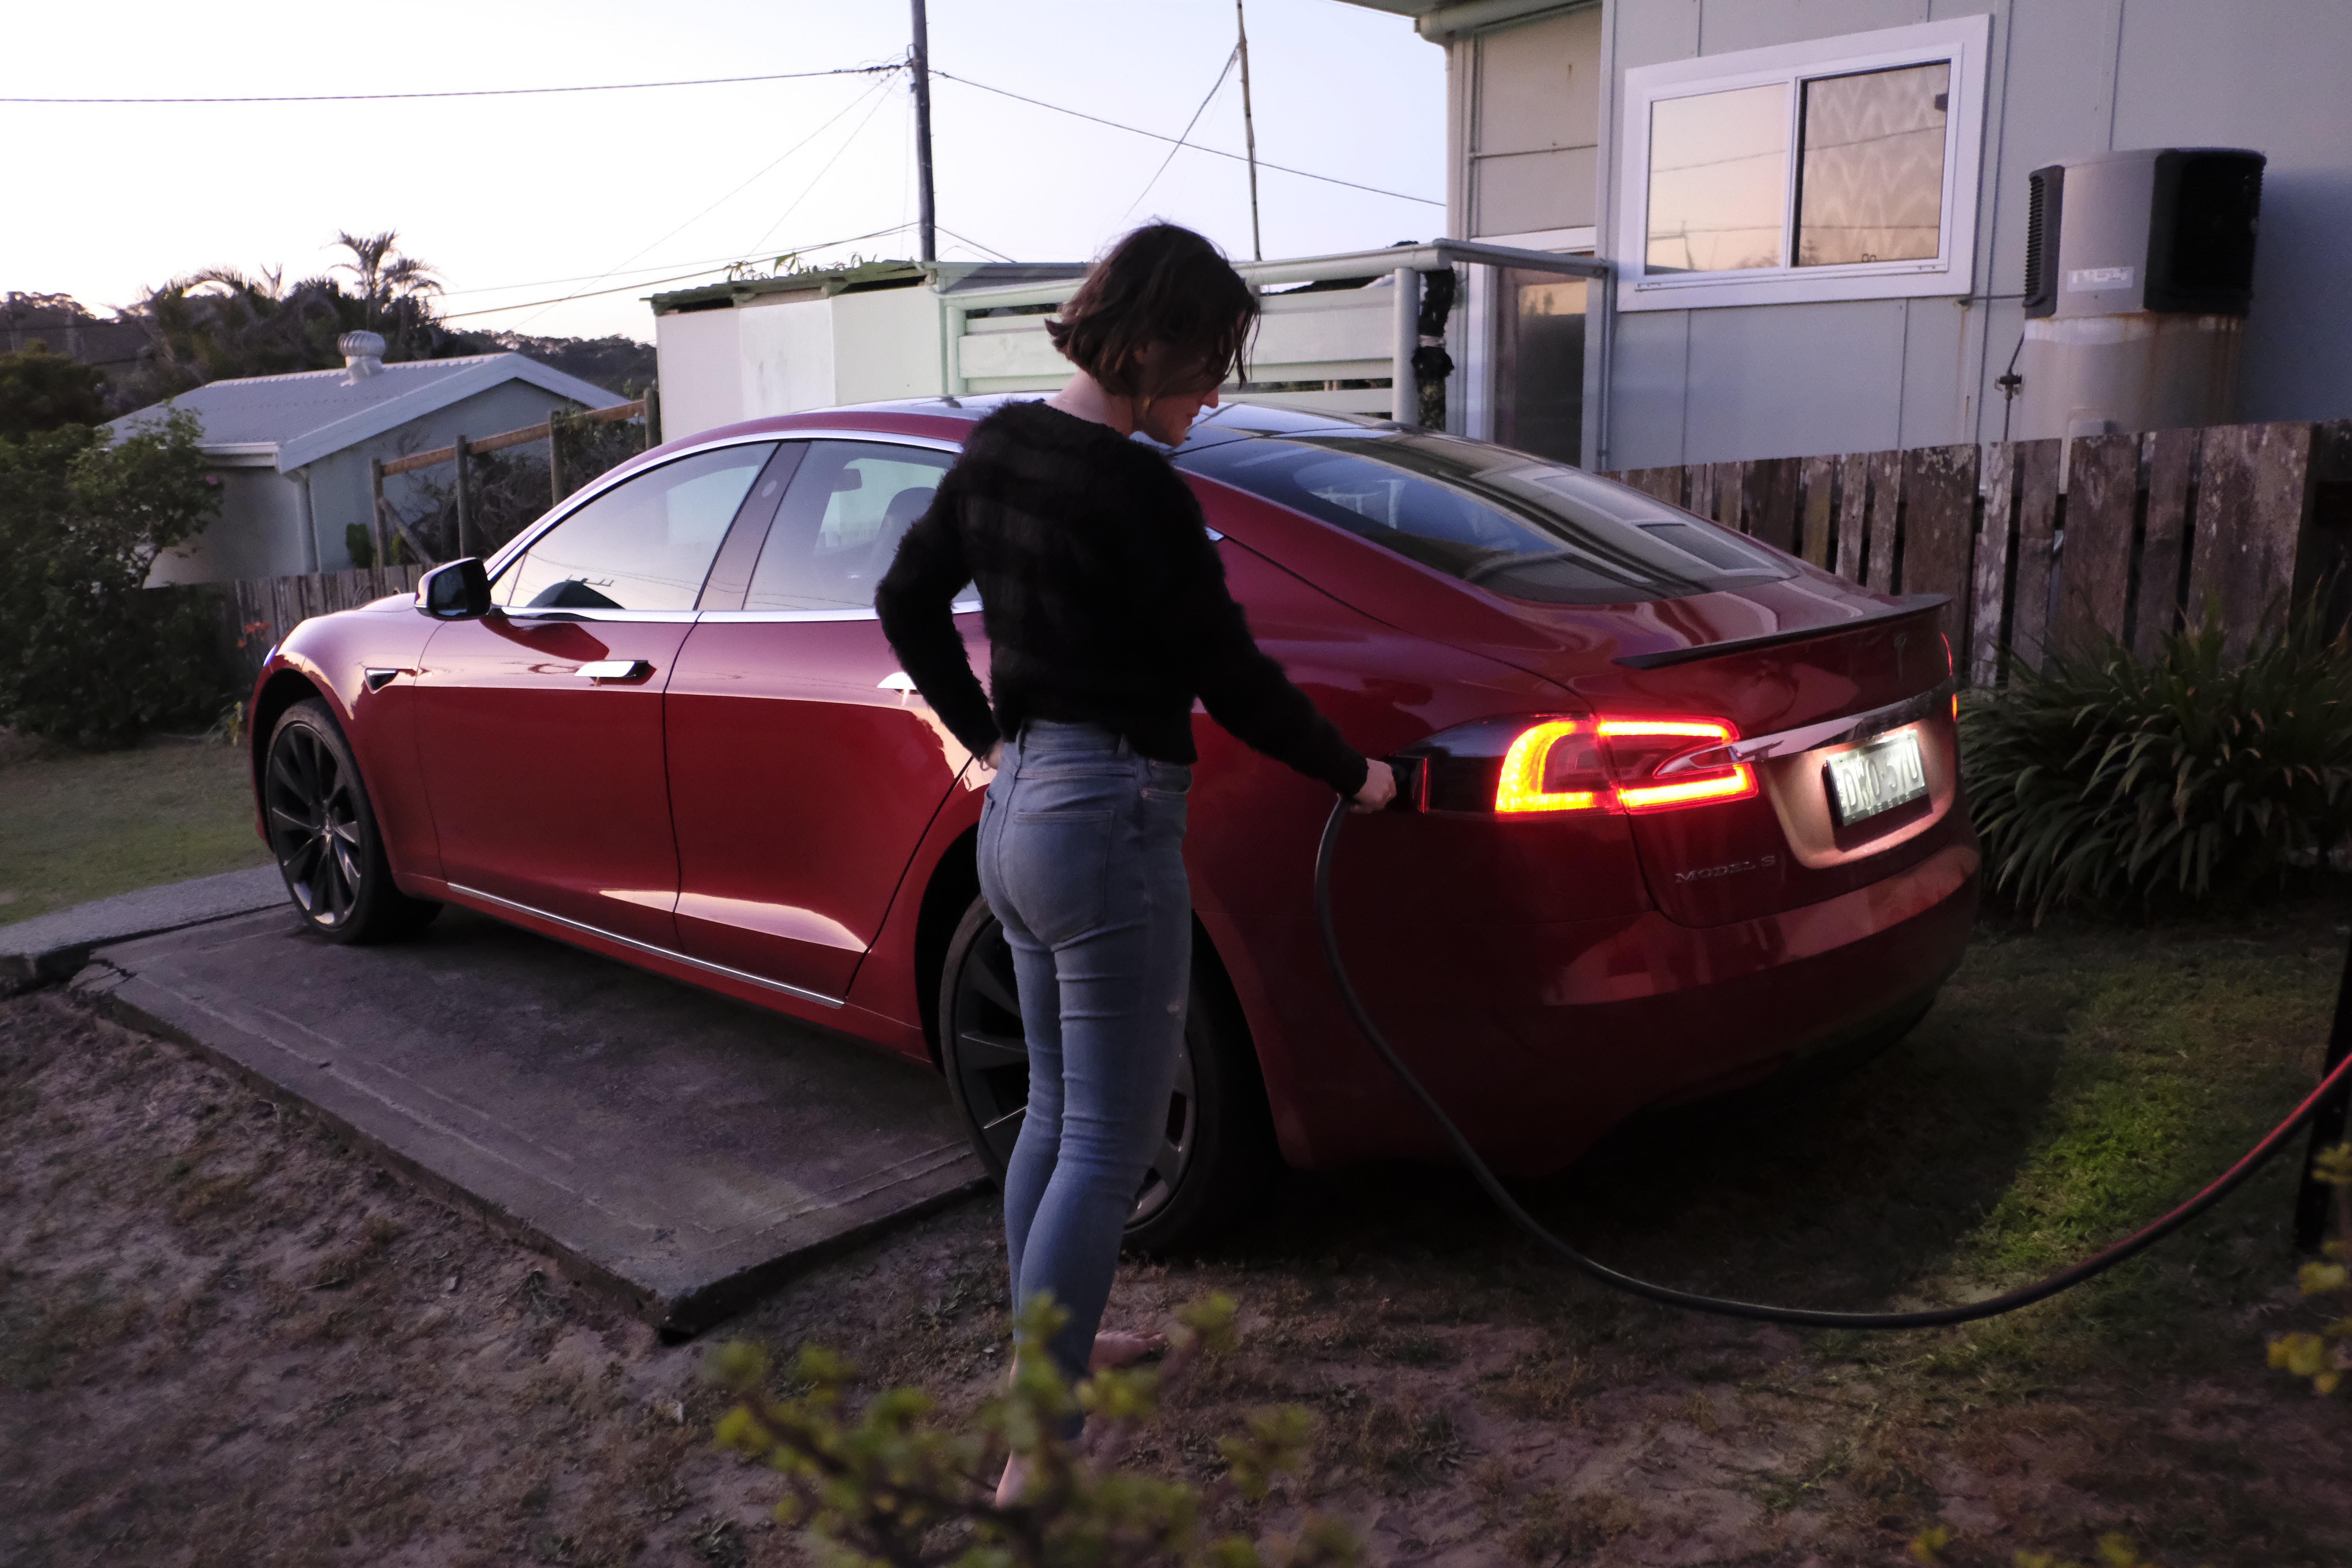 I Drove an Electric Car From Brisbane to Sydney and Didn’t Run Out of Juice